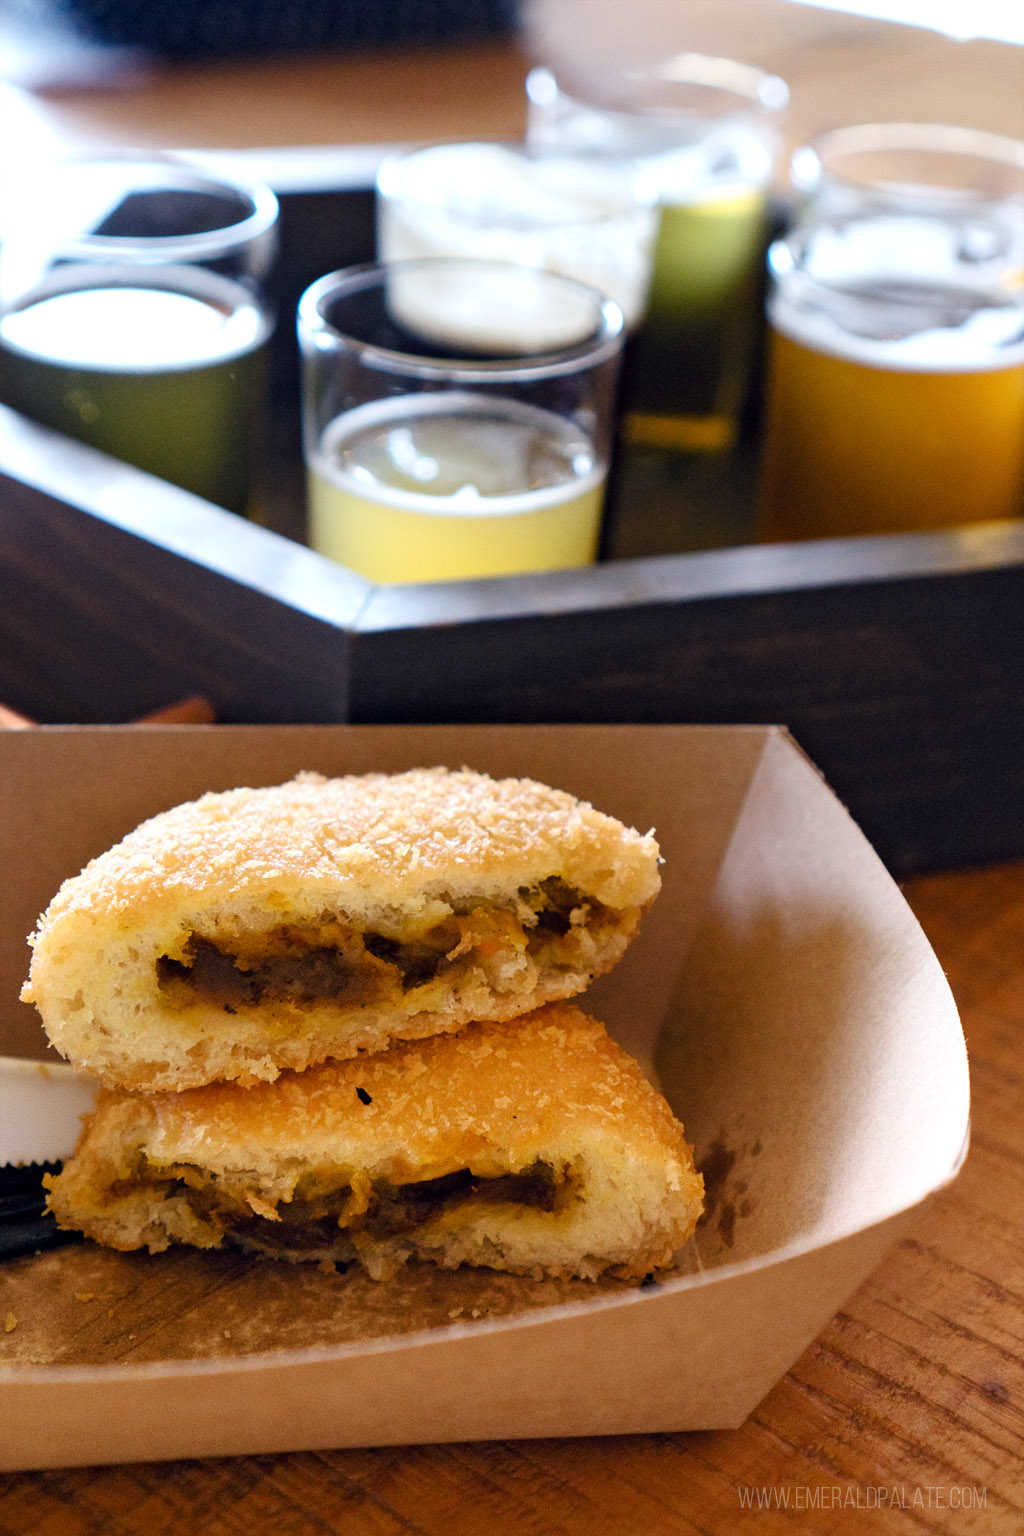 Japanese pastry and beer sampler from a Black-owned Seattle restaurant